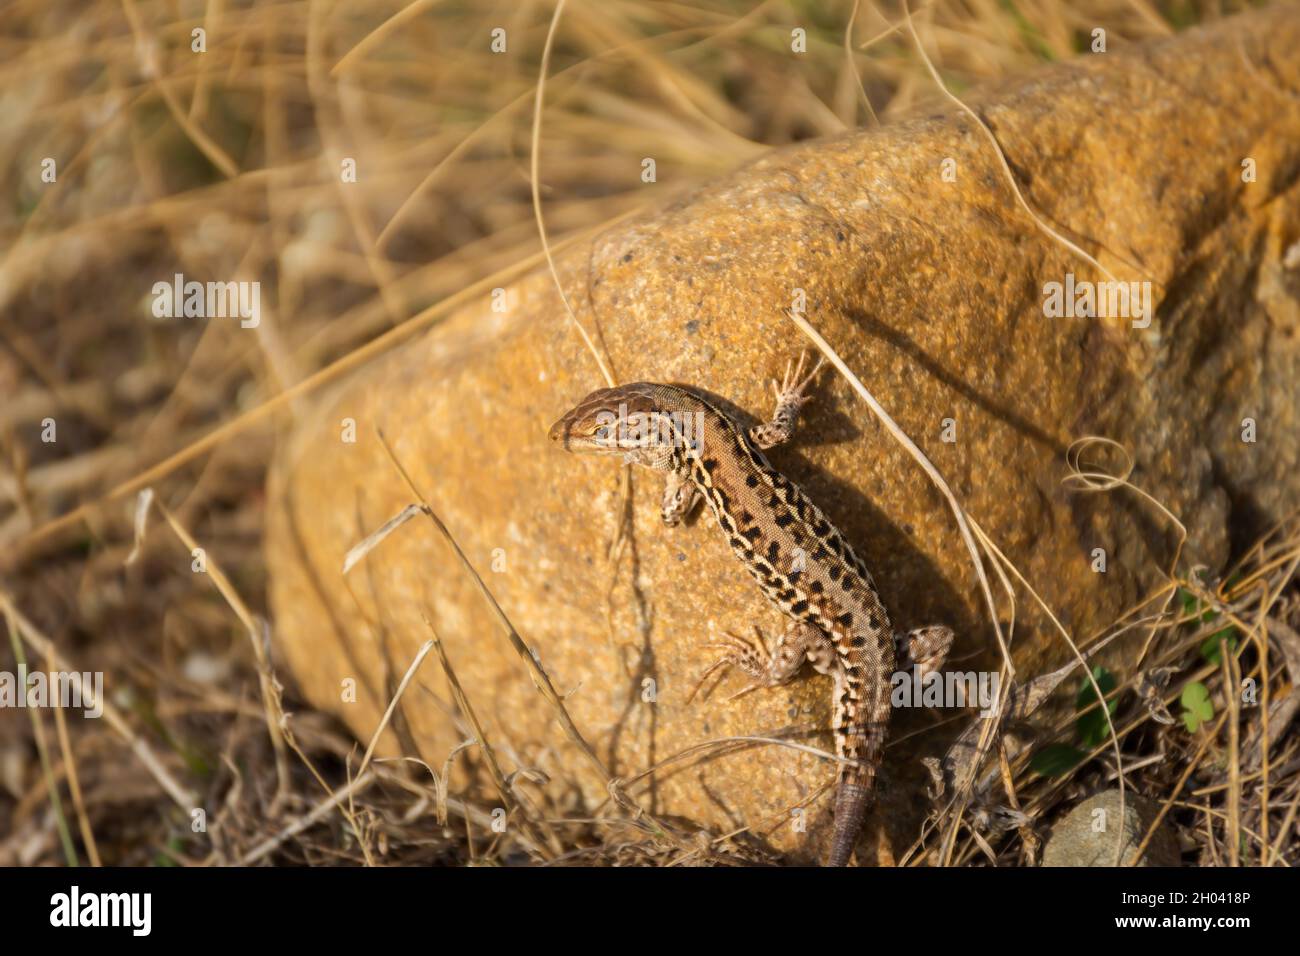 Lizard brown stone. A small reptilian animal. Excellent disguise, wild life of nature. A curious lizard basks in the sun among the beige neutral tones Stock Photo